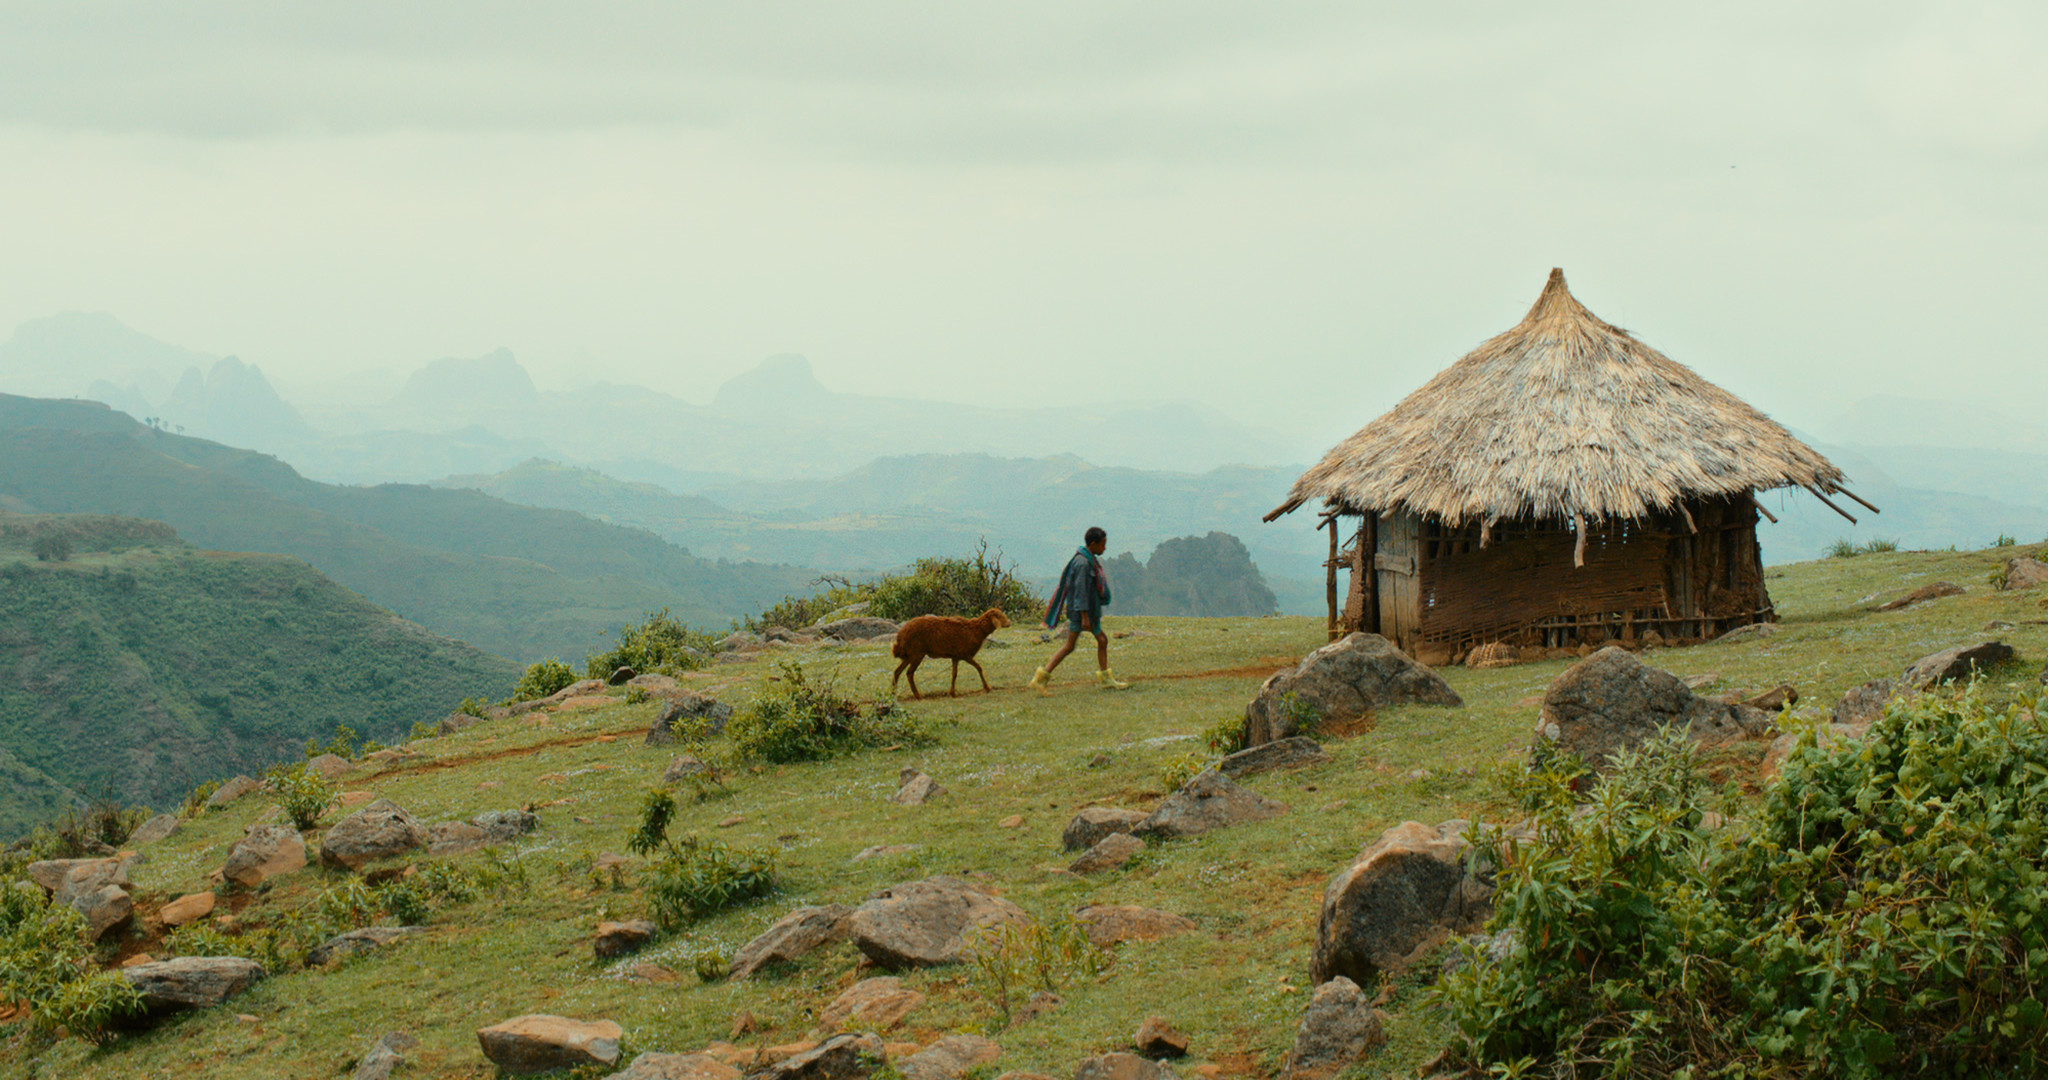 2048x1080 Exclusive: KimStim Acquires Ethiopia's Coming-of-Age Oscar Entry 'Lamb'